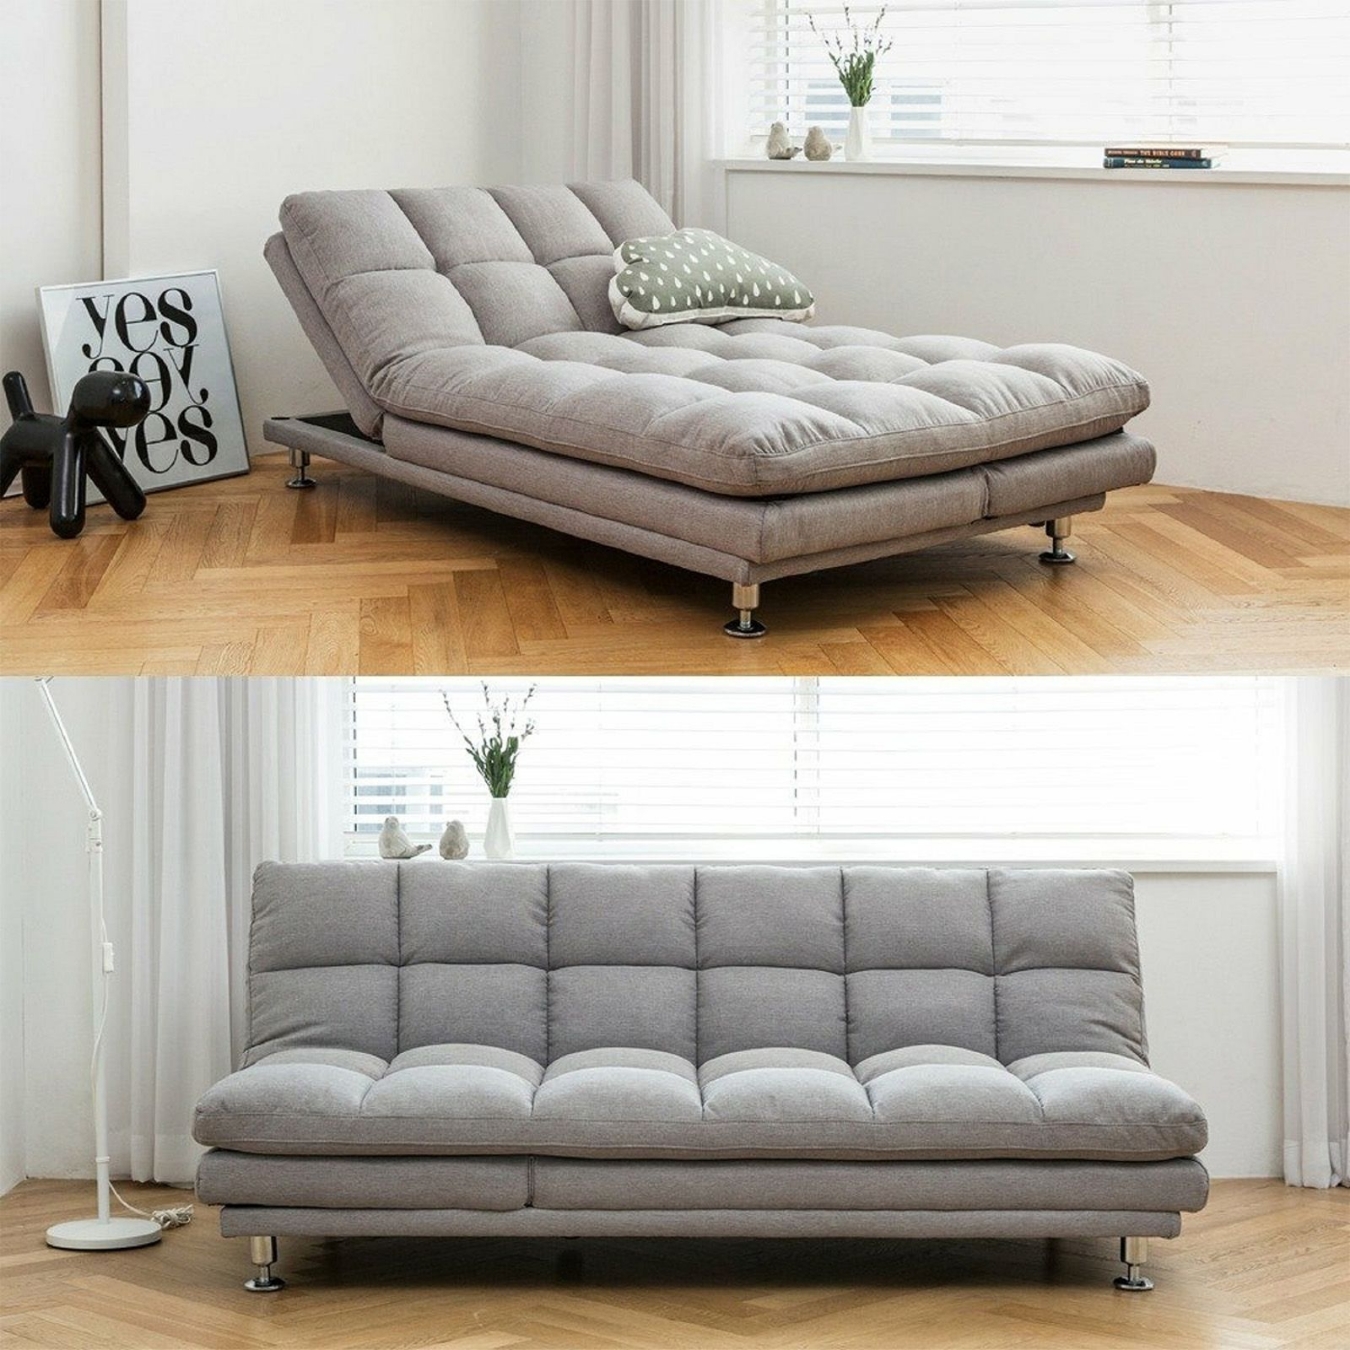 Vivian Sofa provides upgraded cushions brings the most comfortable felling. High quality steel legs guarantee the stability and edibility.